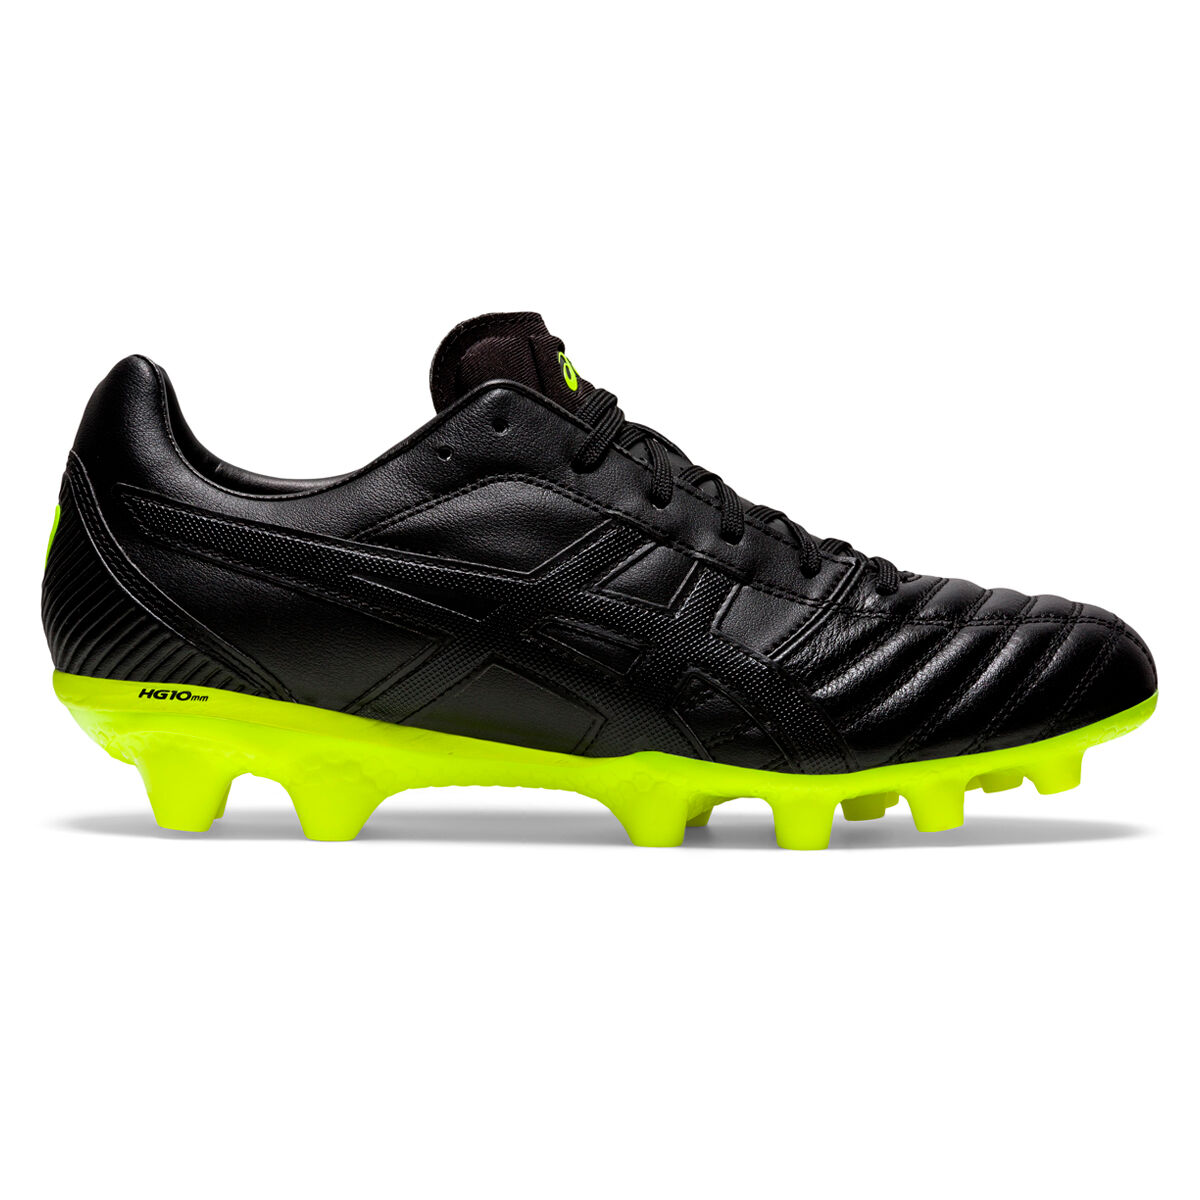 Asics Lethal Flash IT Football Boots 